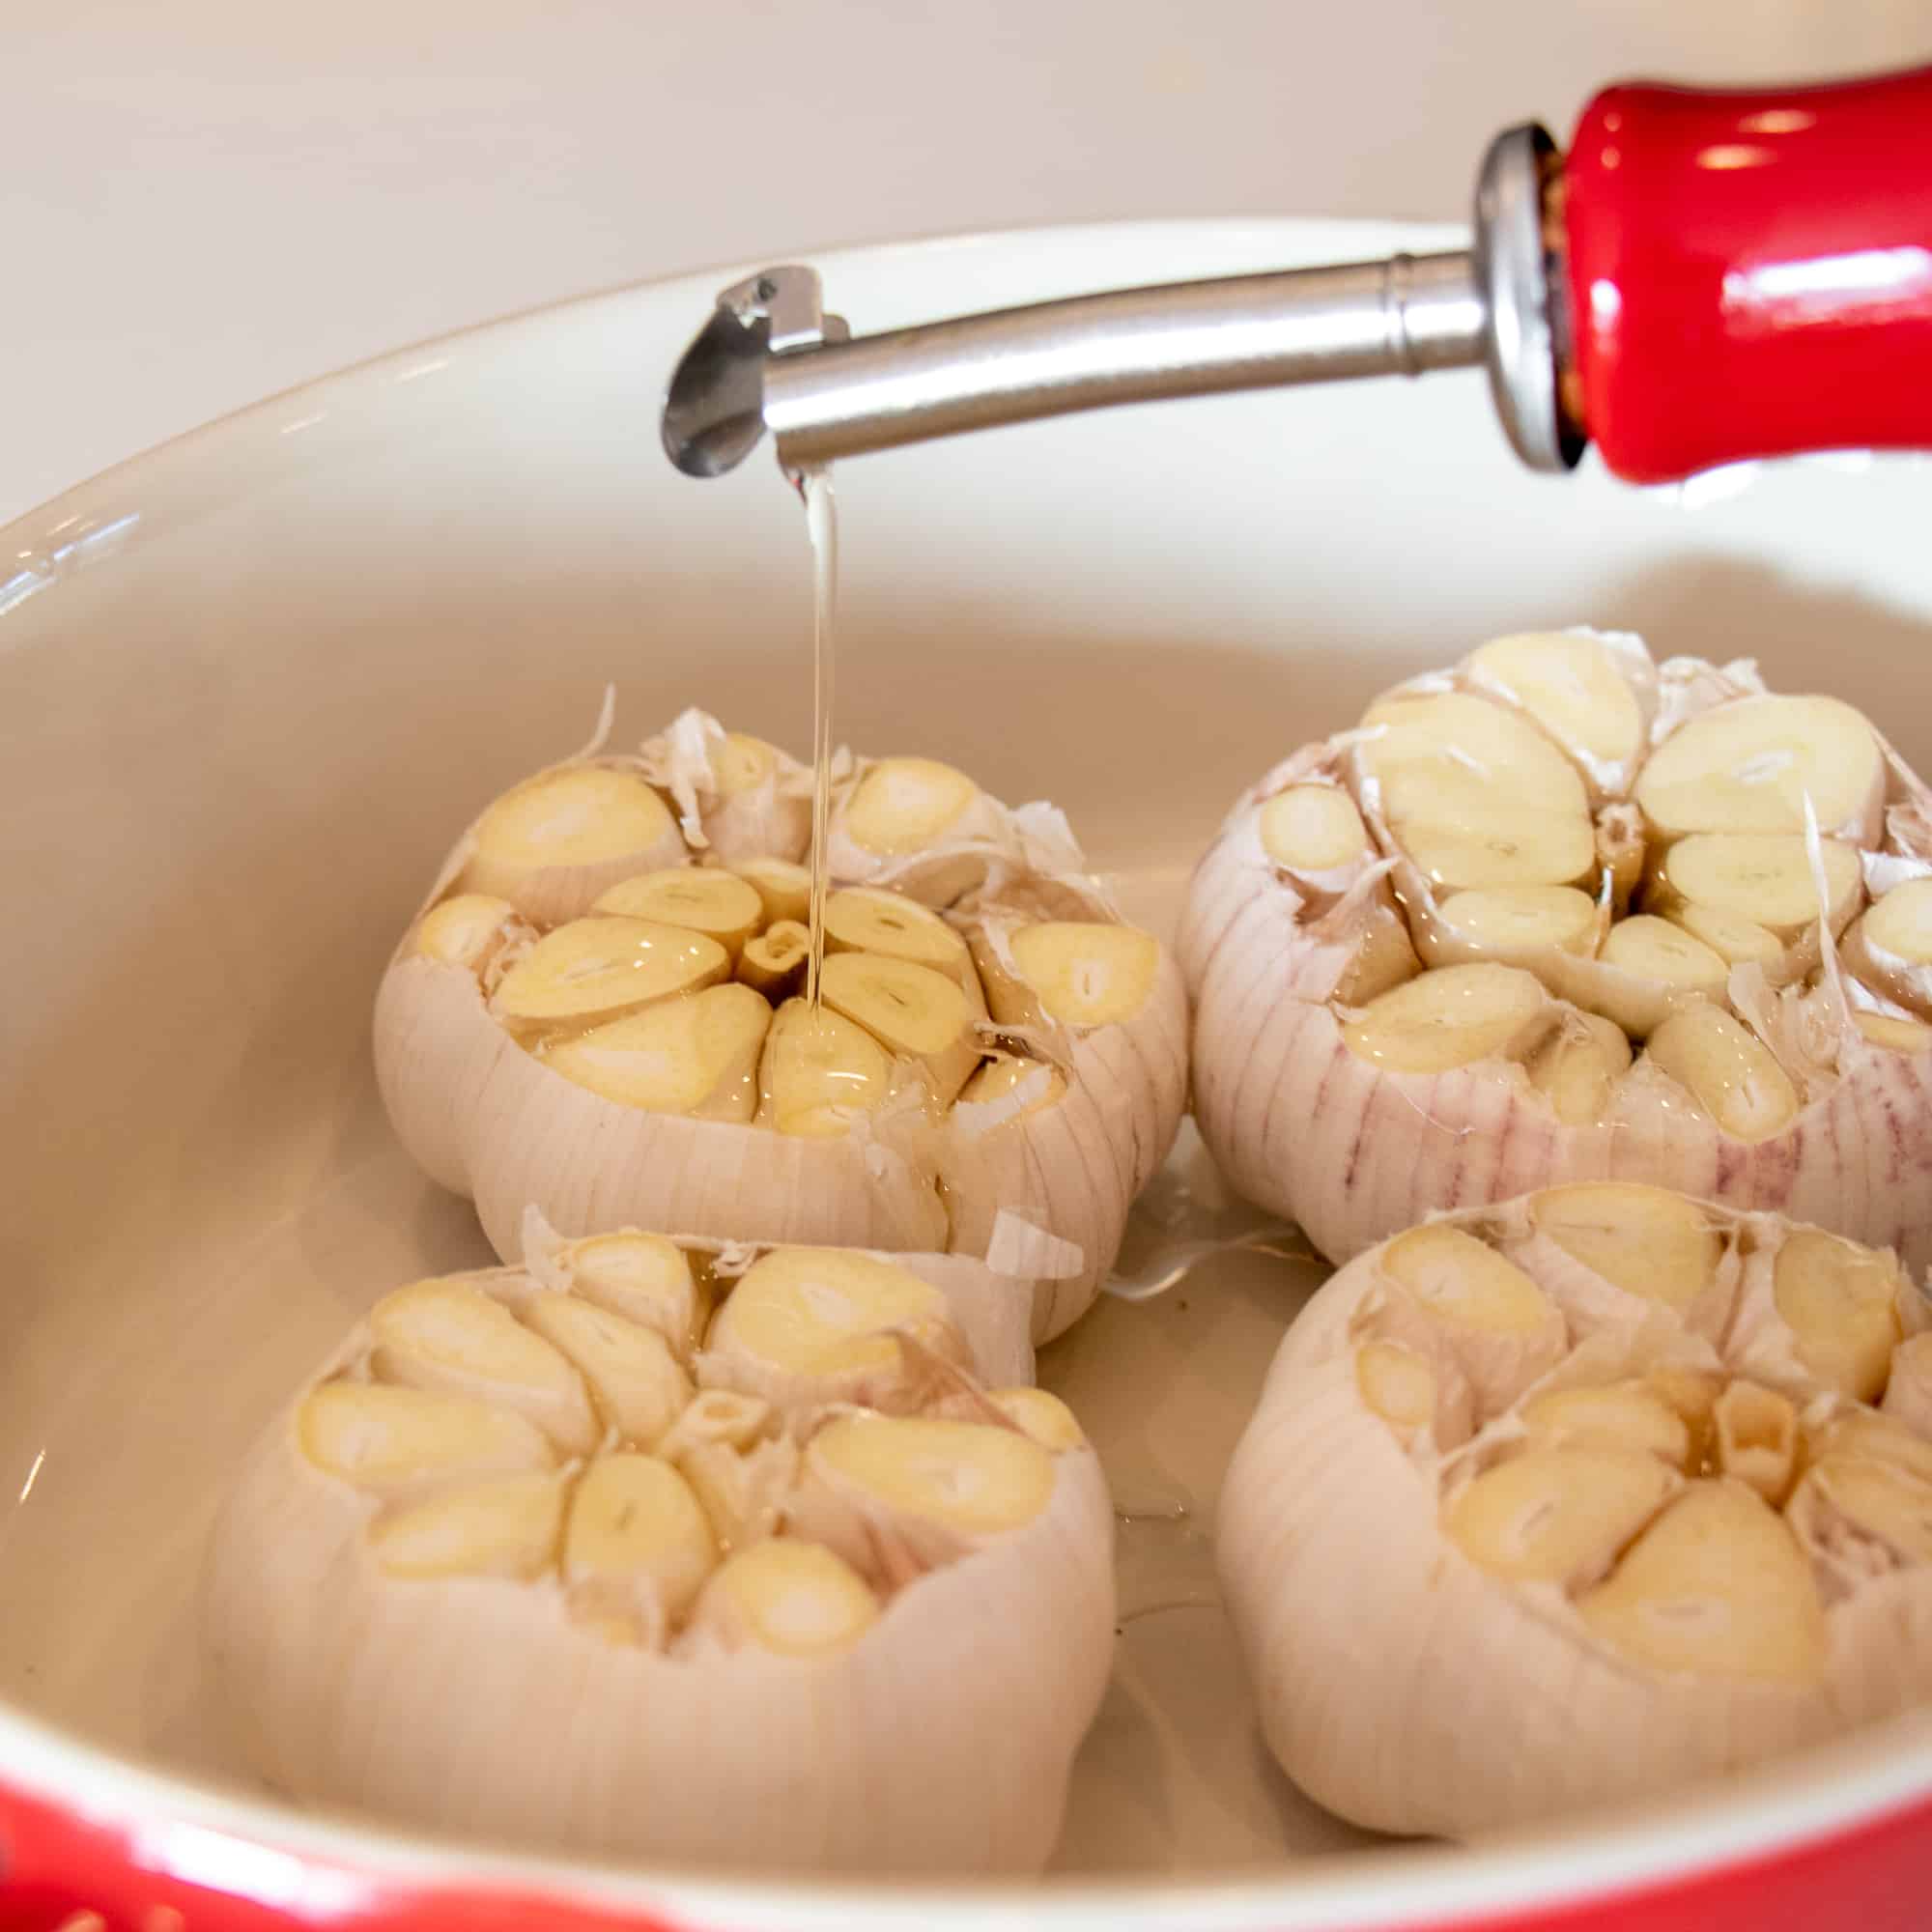 Easy instructions for how to roast whole head of garlic.